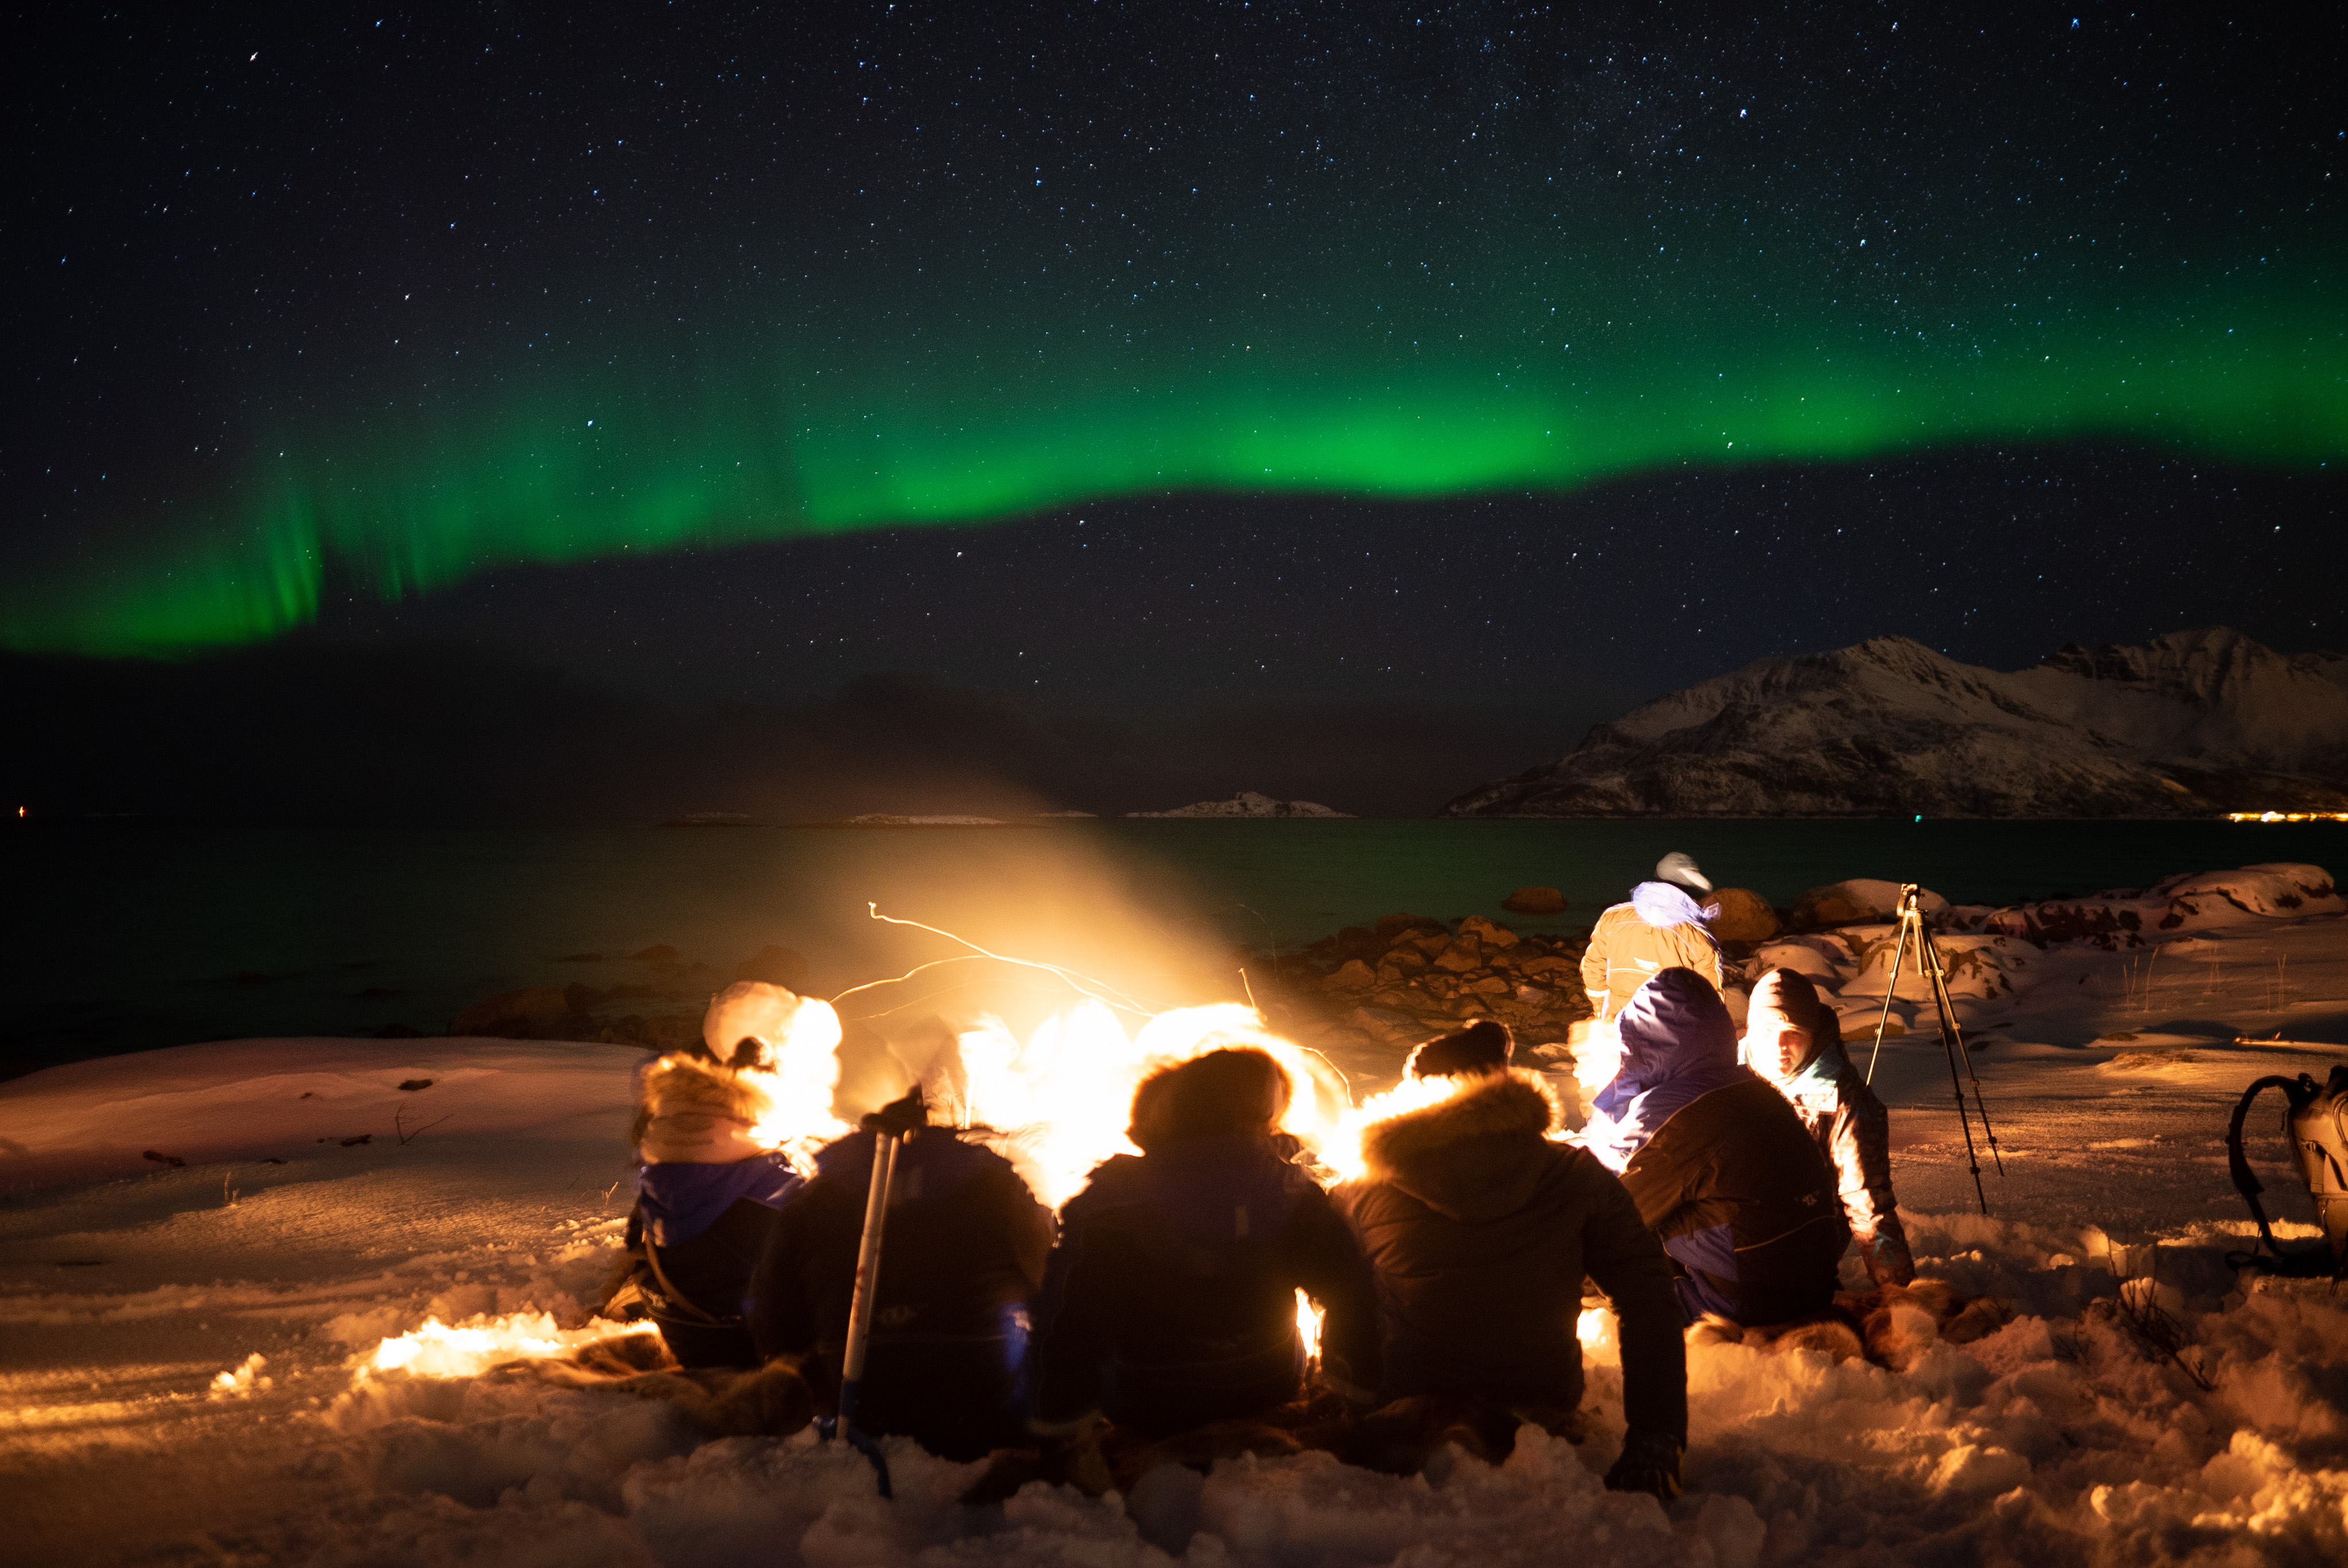 campfire in Norway surrounded with people wearing heavy coats and northern lights in the night sky